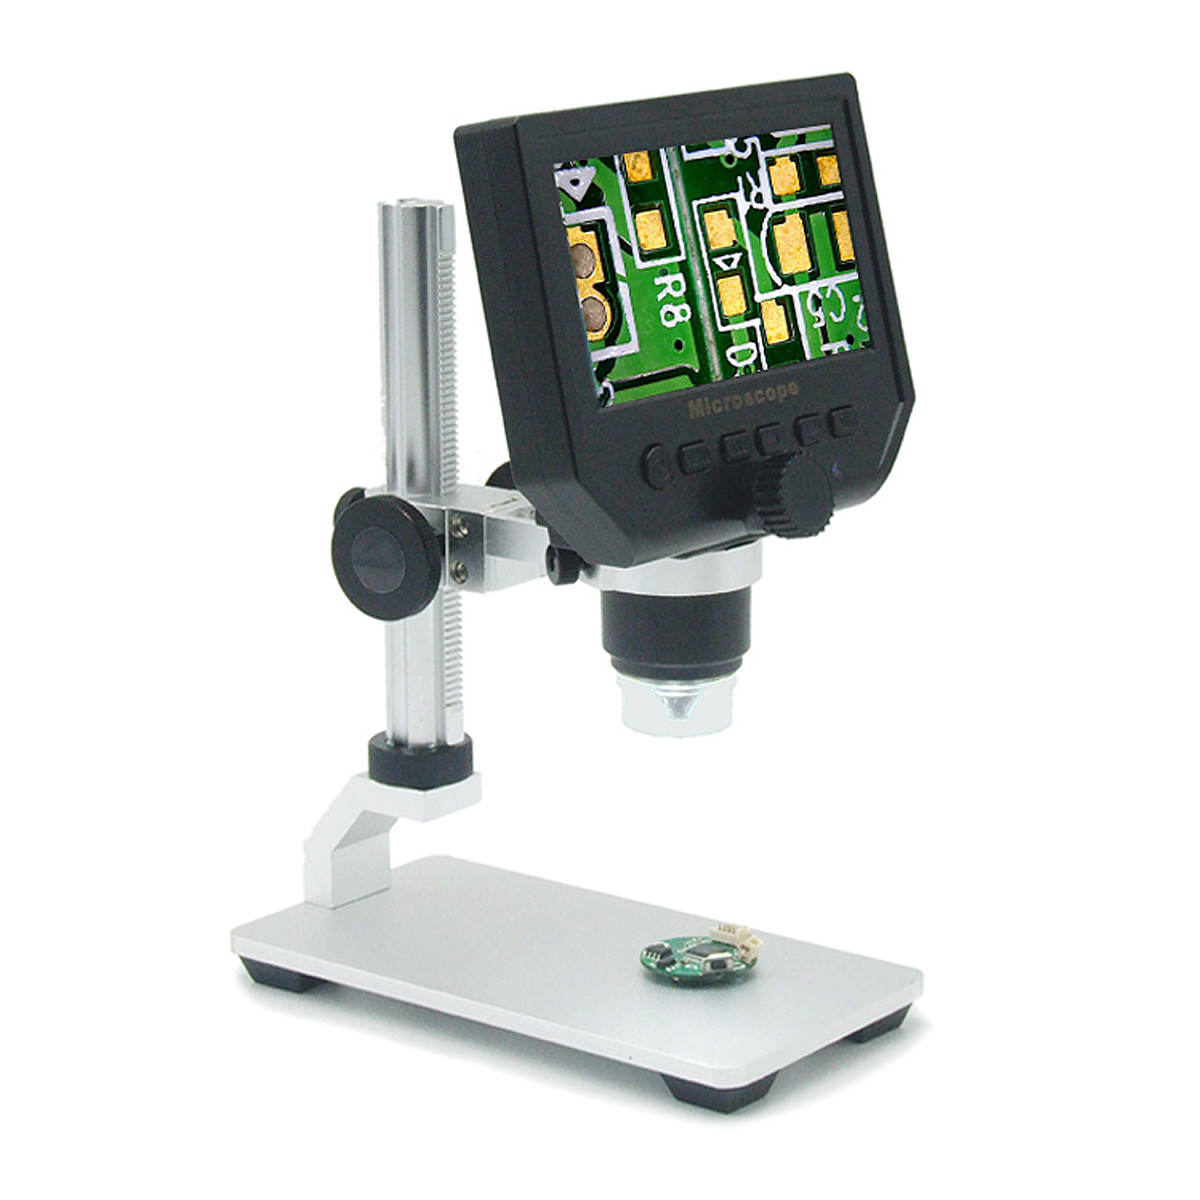 Mustool G600 Digital 1-600X 3.6MP 4.3inch HD LCD Display Microscope Continuous Magnifier with Aluminum Alloy Stand Upgrade Version 45